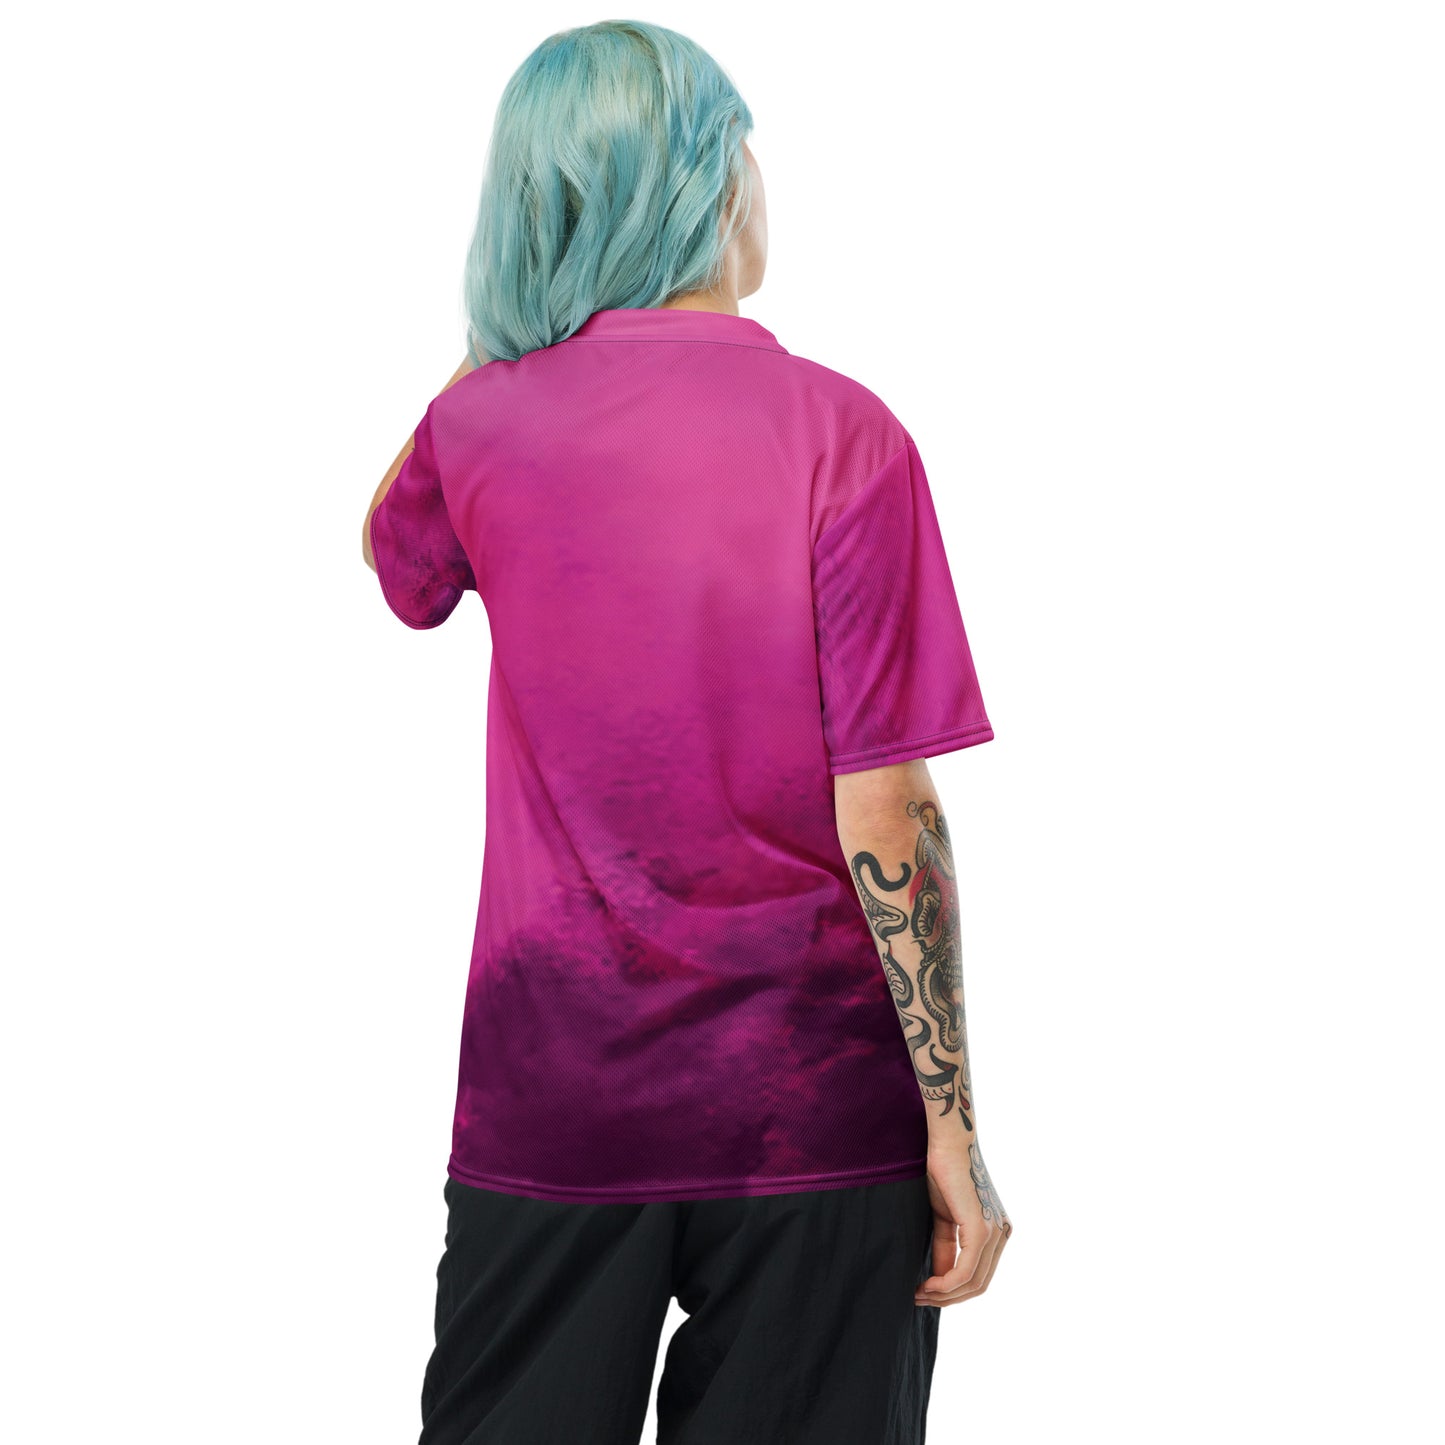 ROSE of EARL  Recycled unisex sports jersey